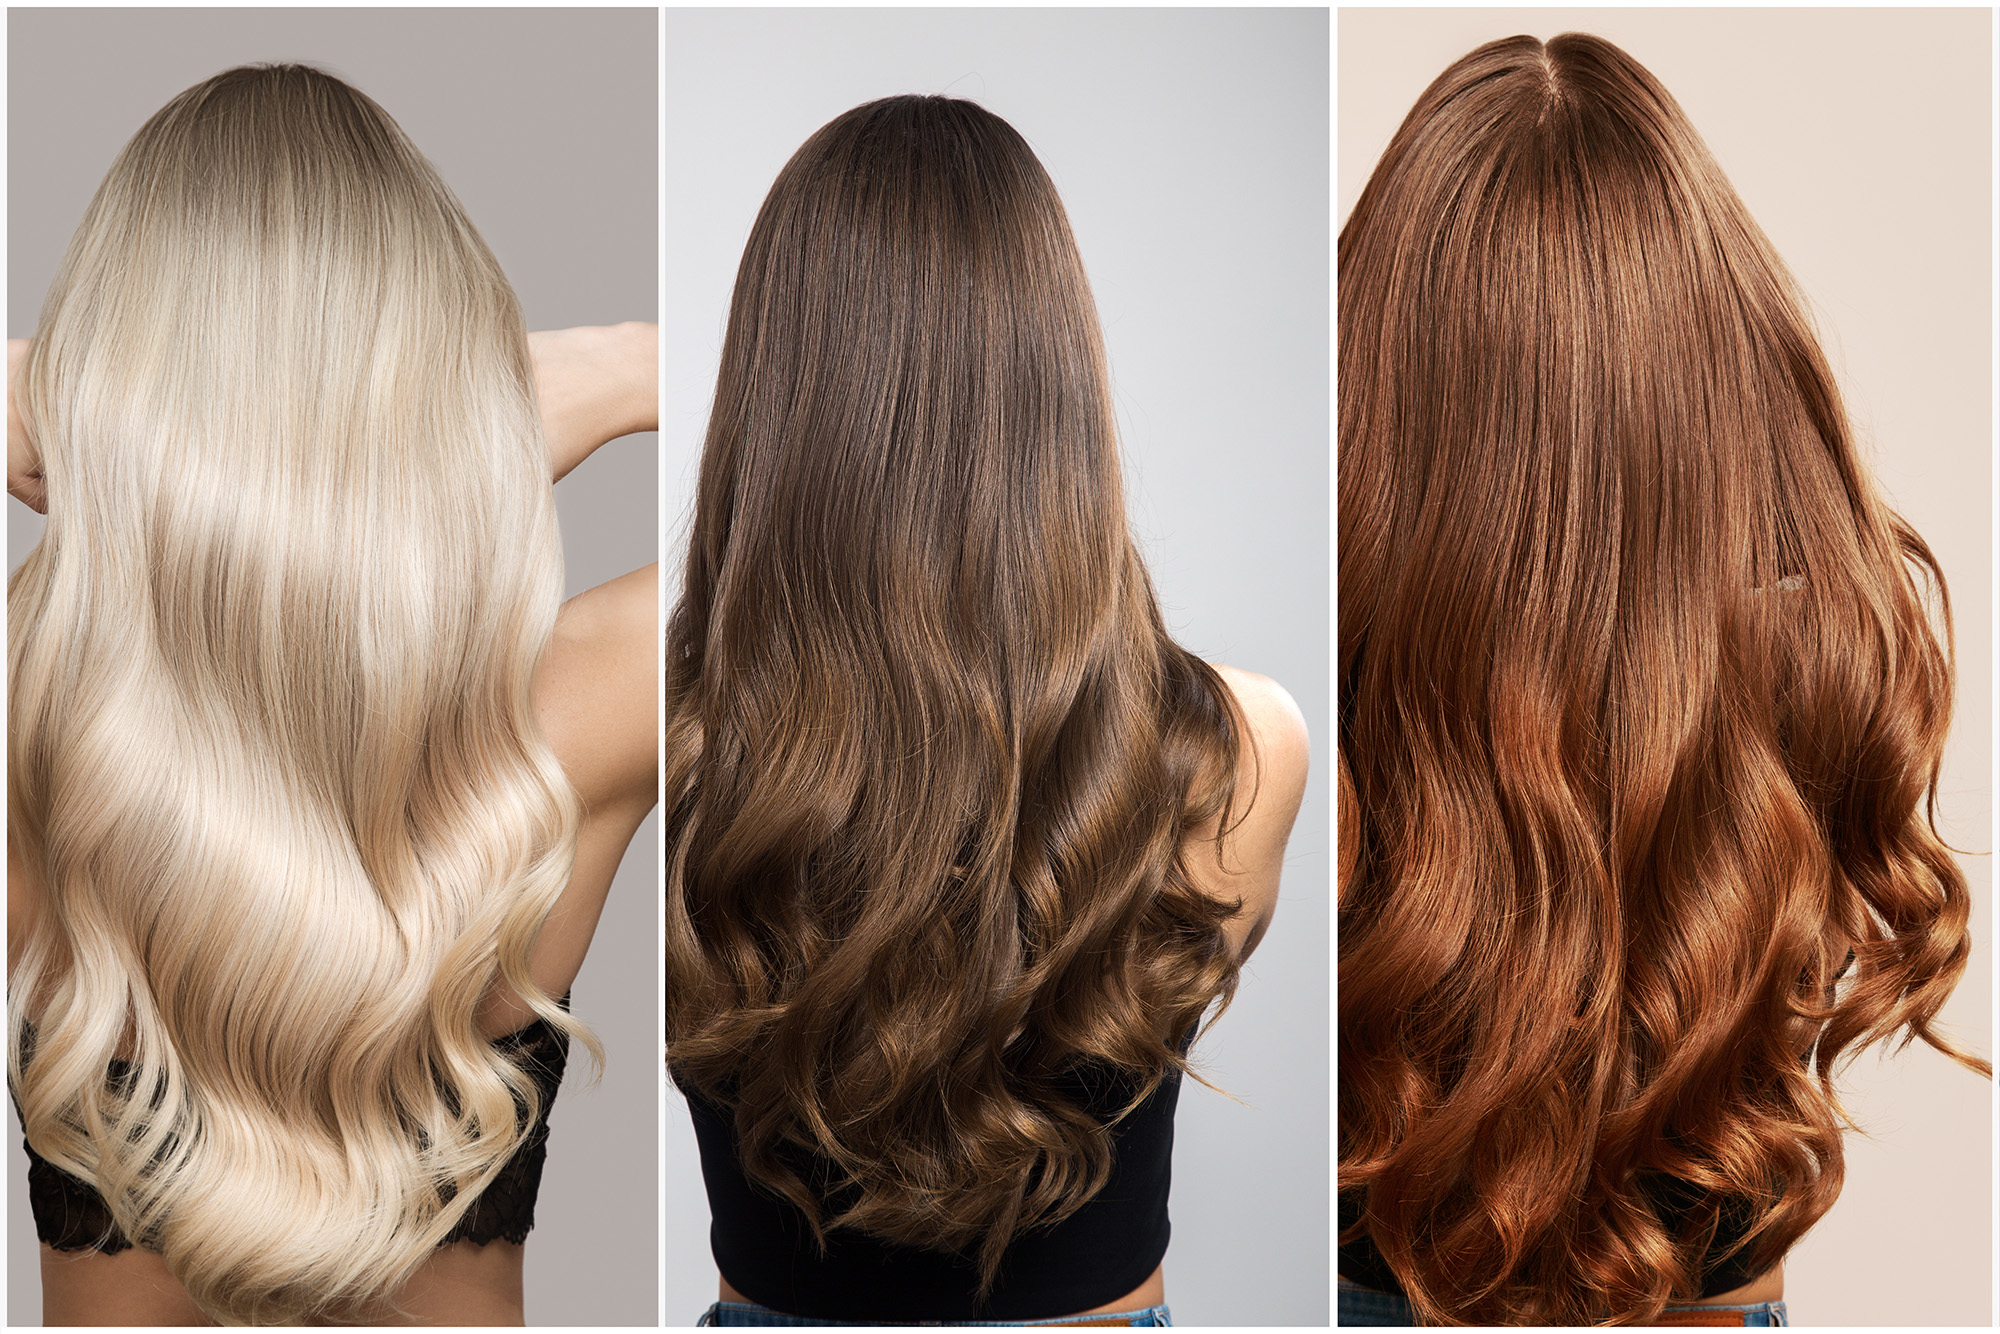 All About Undertones: Finding The Right Hair Color For Your Skin